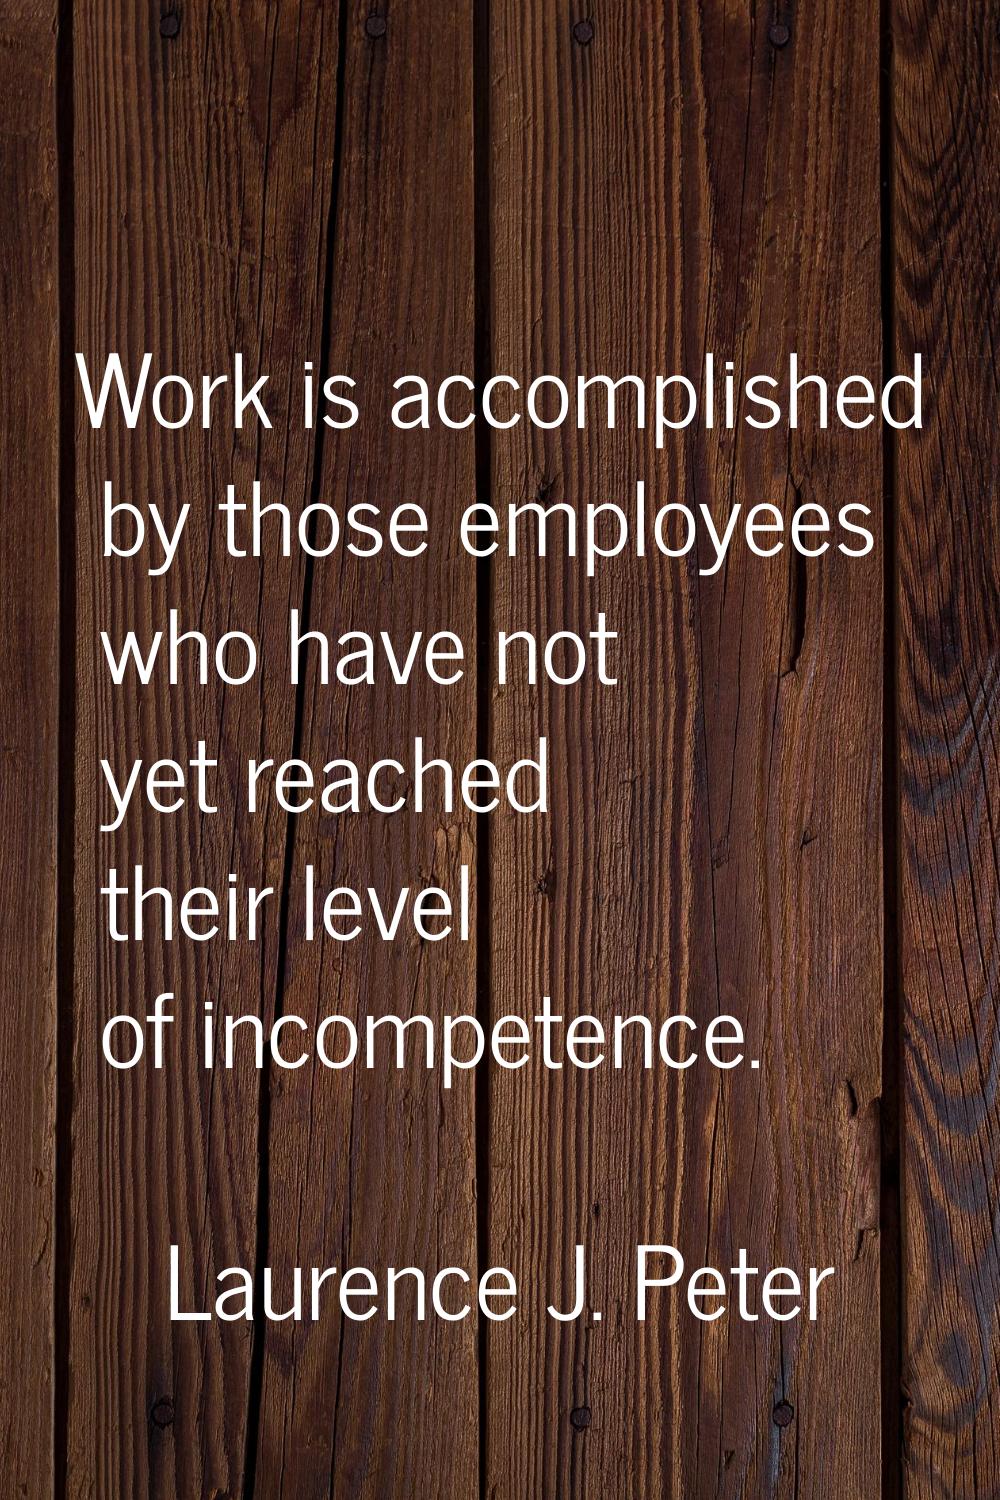 Work is accomplished by those employees who have not yet reached their level of incompetence.